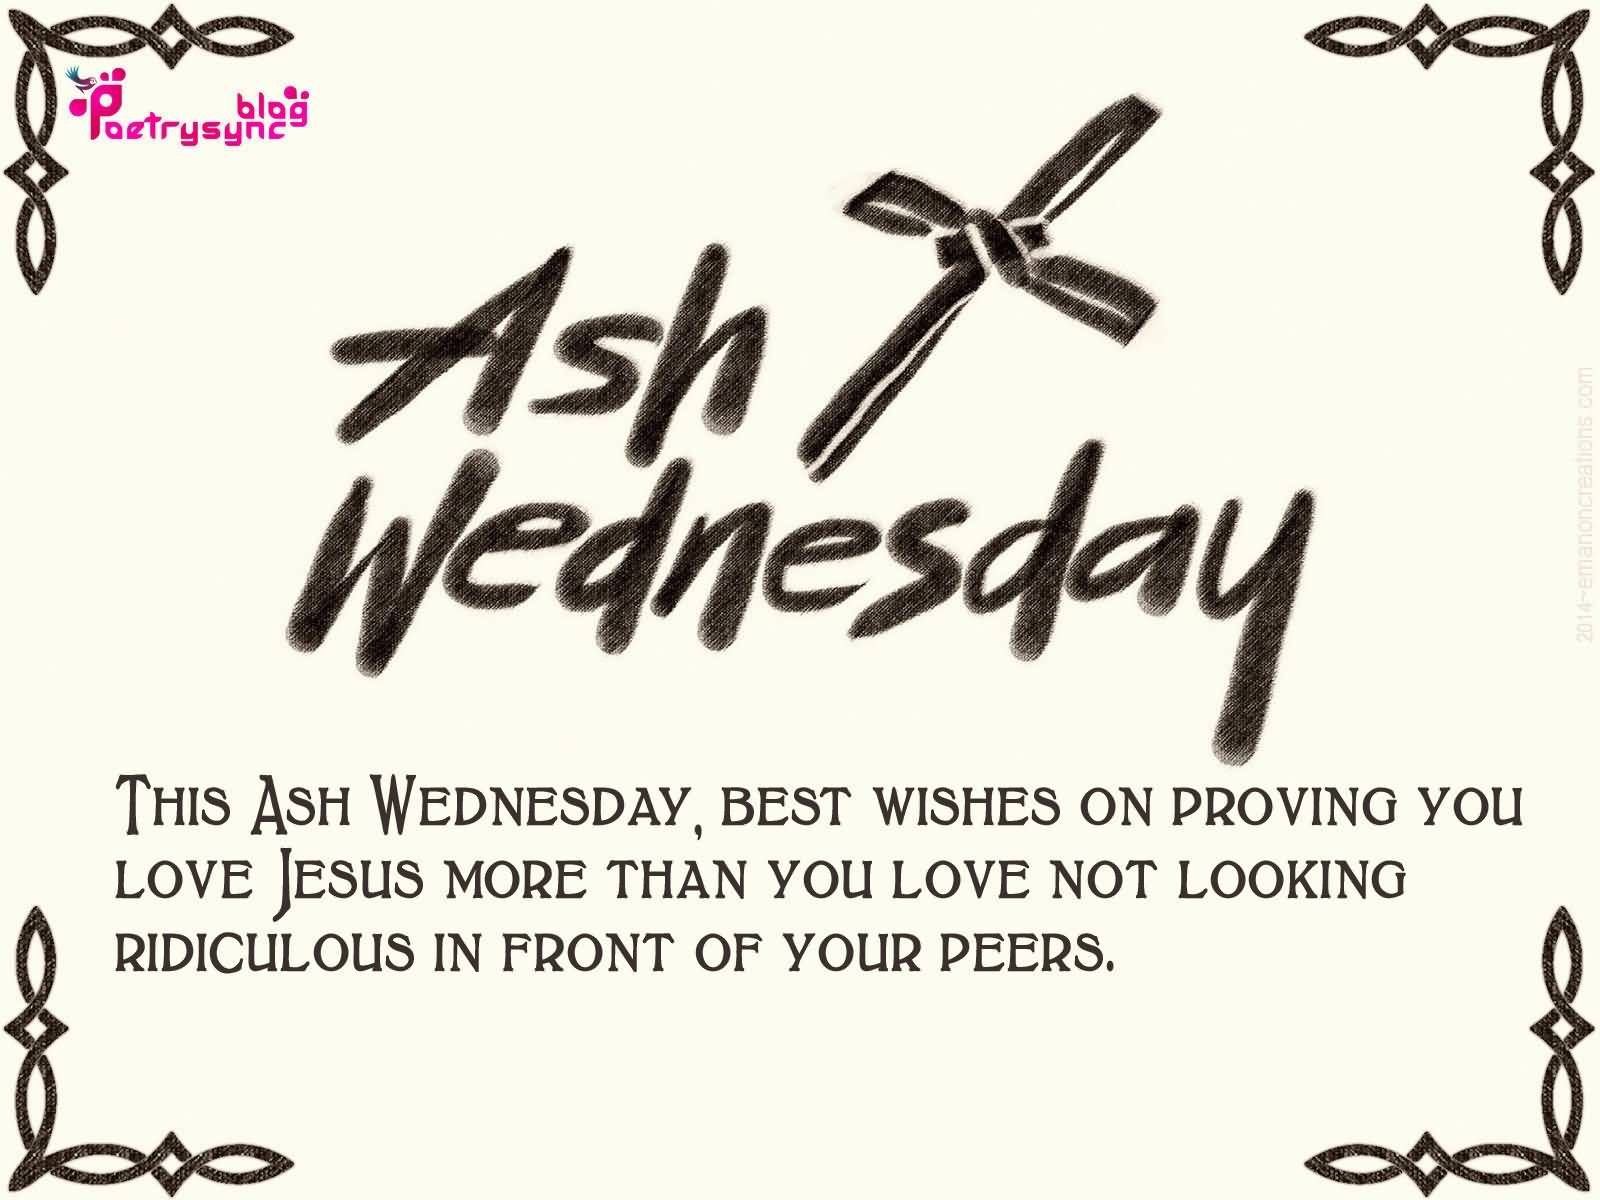 This Ash Wednesday Best Wishes On Proving You Love Jesus More Than You Love Not Looking Ridiculous In Front Of Your Peers